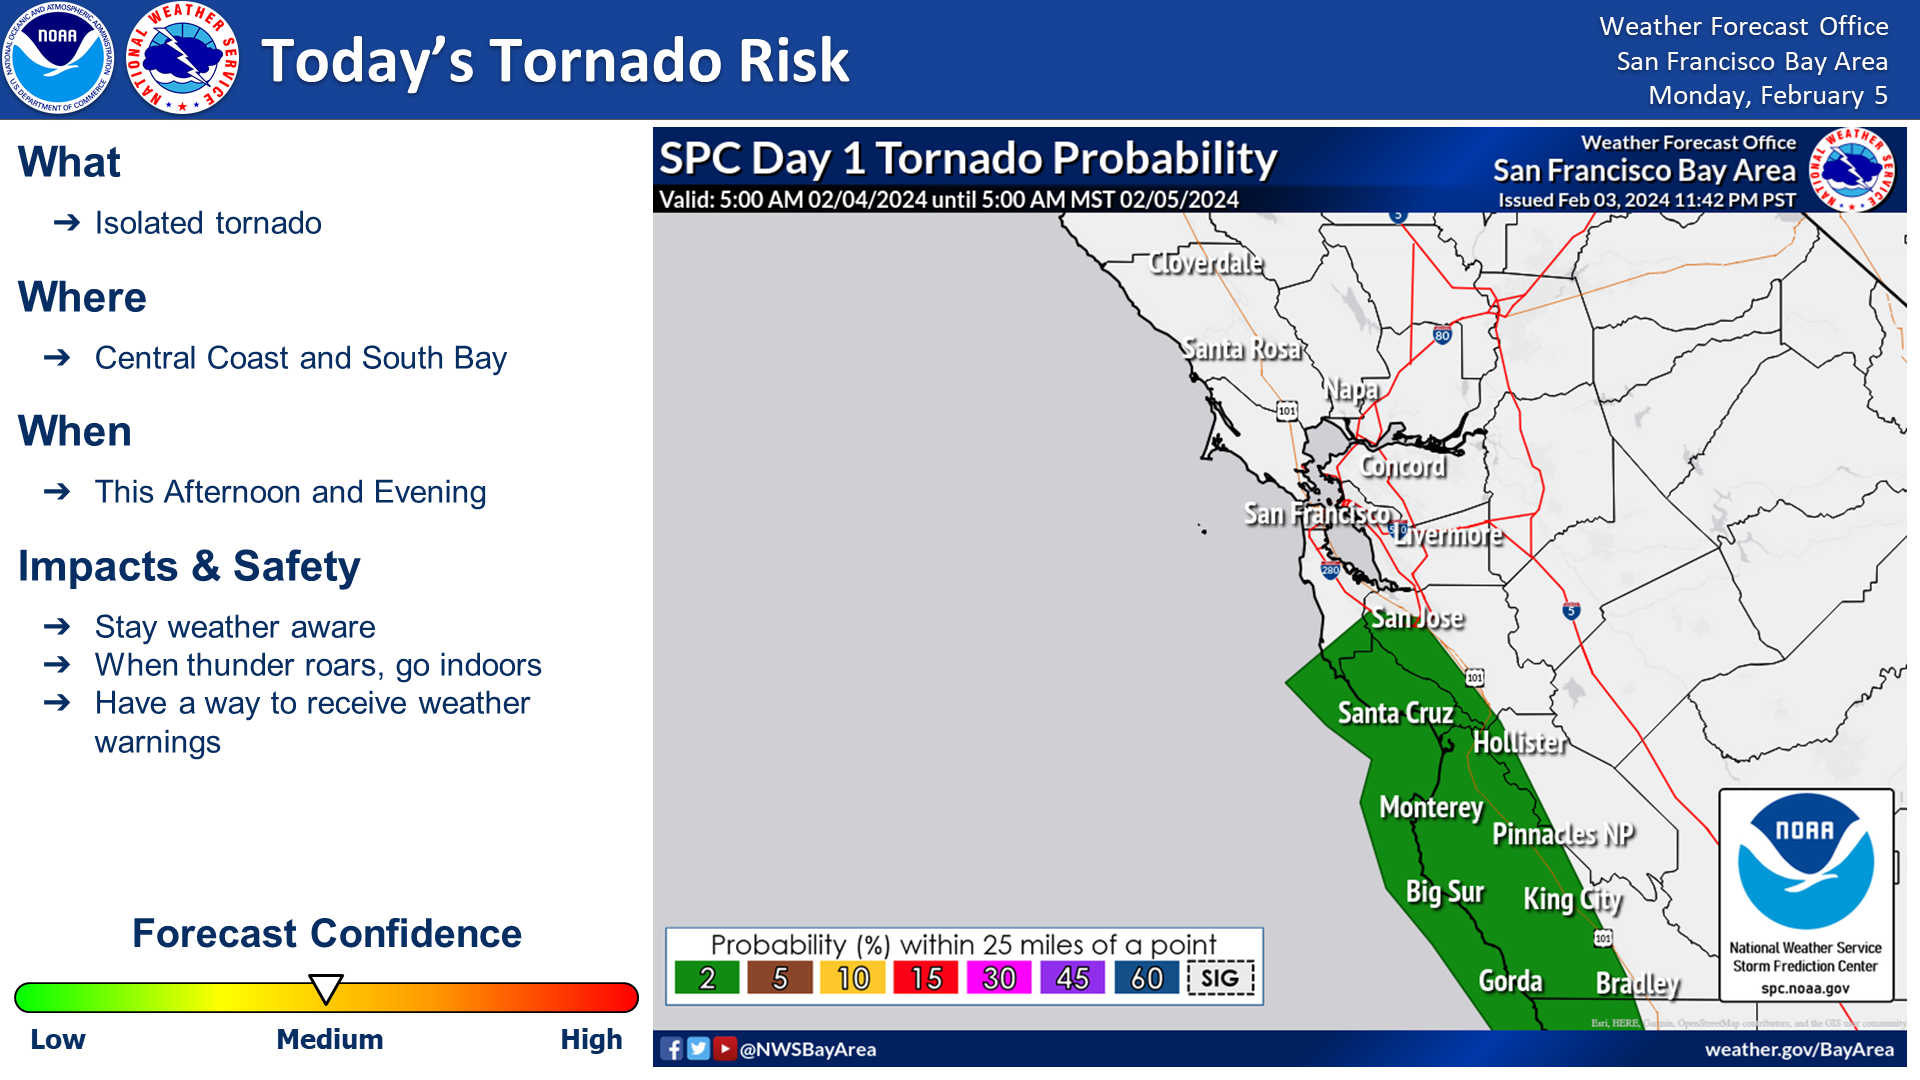 Tornado Threat at 2% for Central Coast